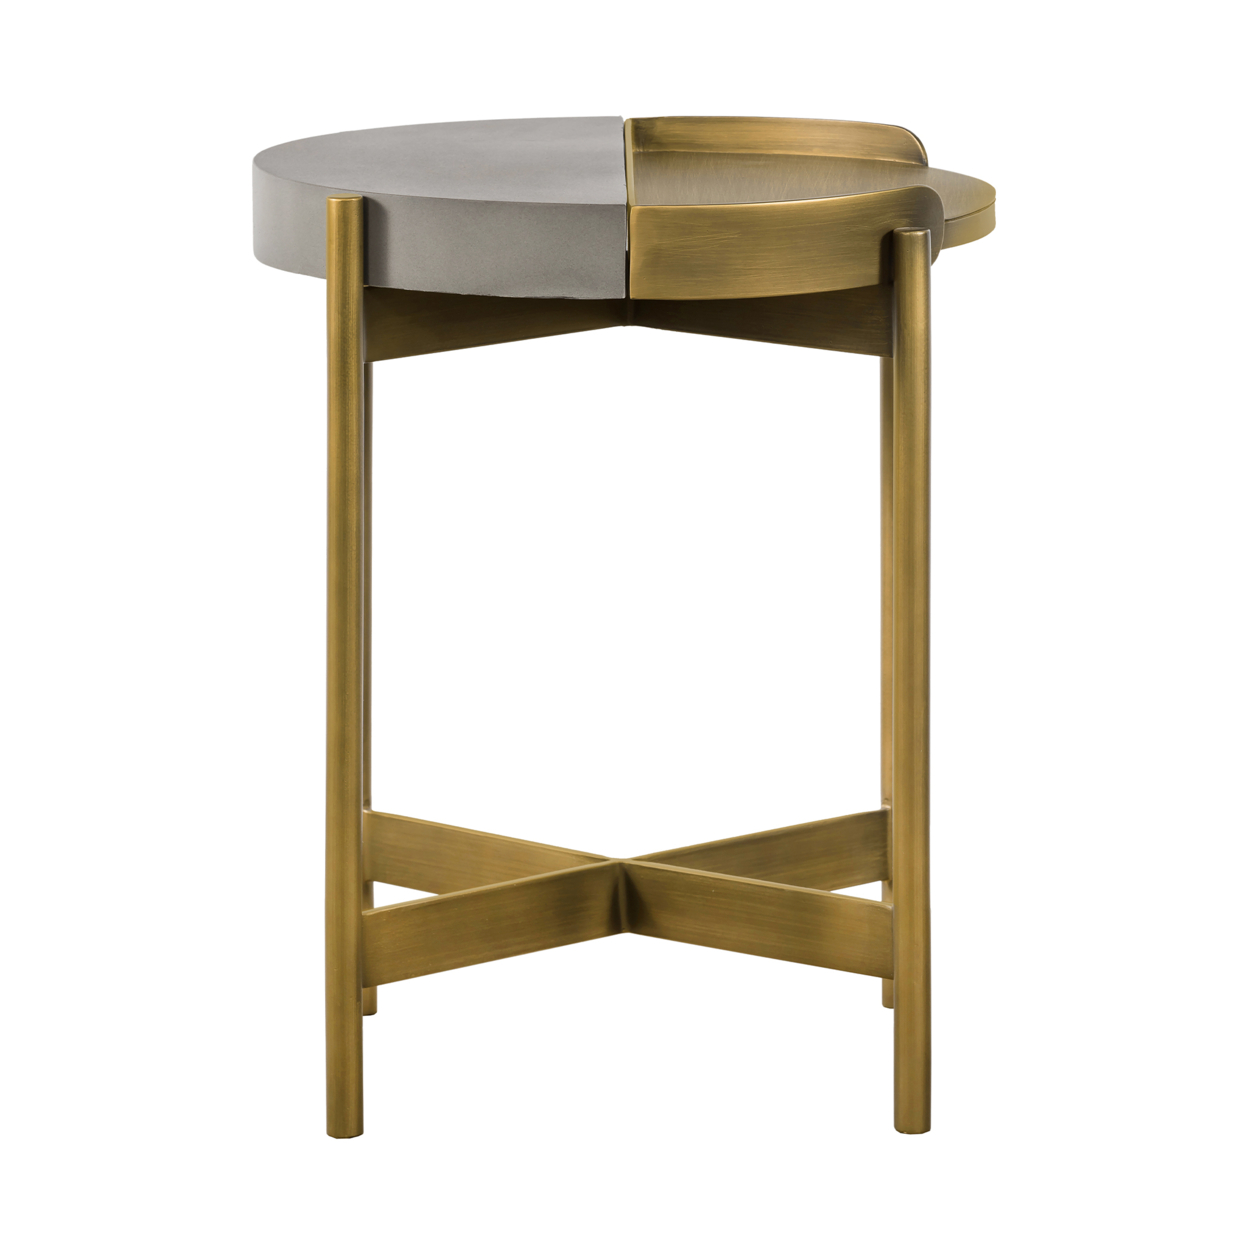 Concrete End Table With X Shape Base, Gray And Gold- Saltoro Sherpi